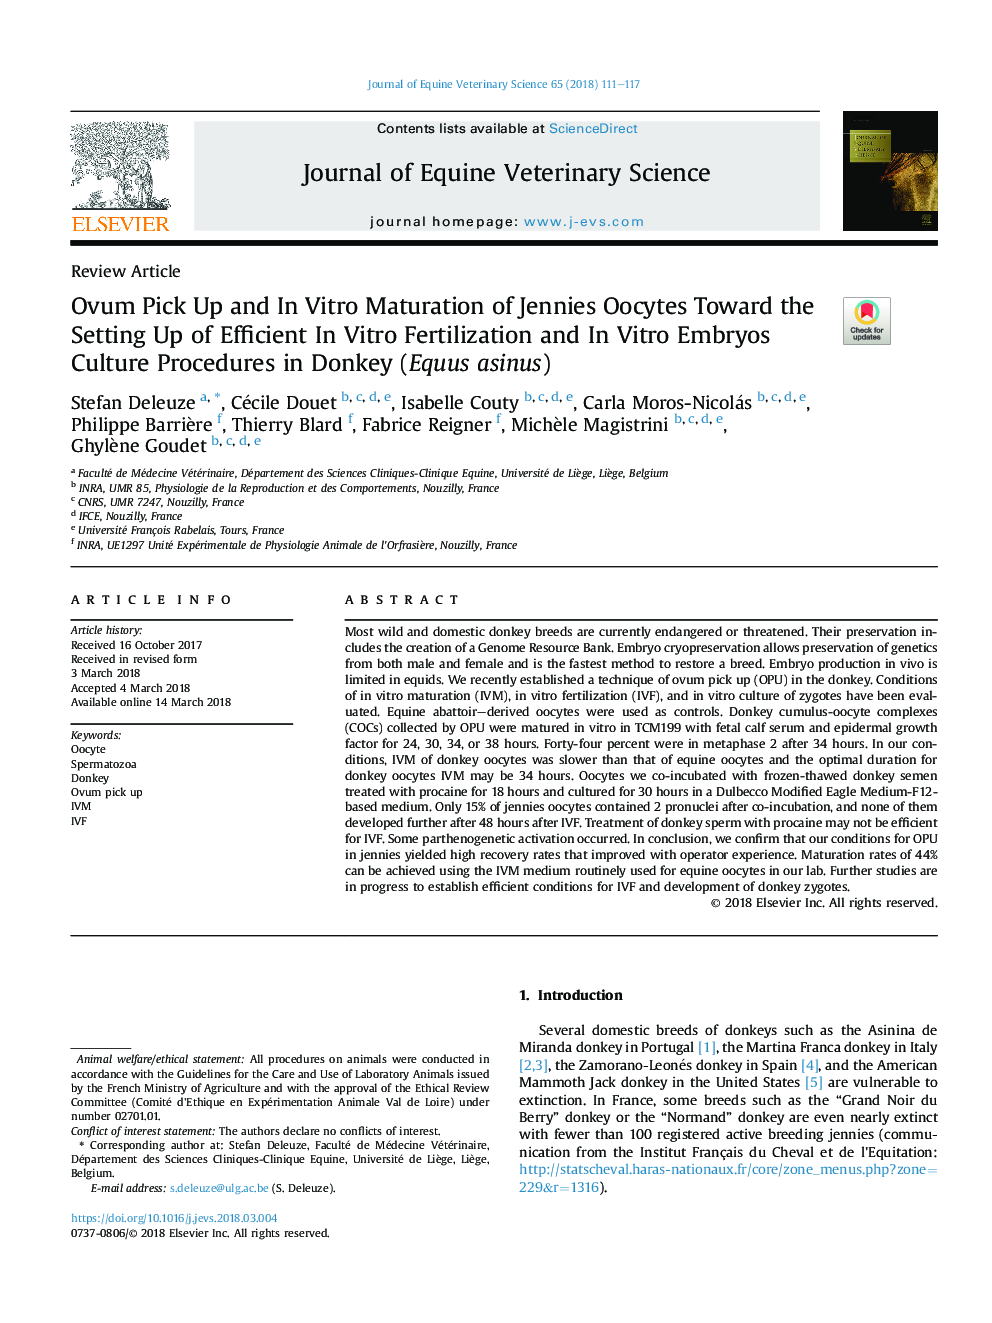 Ovum Pick Up and InÂ Vitro Maturation of Jennies Oocytes Toward the Setting Up of Efficient InÂ Vitro Fertilization and InÂ Vitro Embryos Culture Procedures in Donkey (Equus asinus)